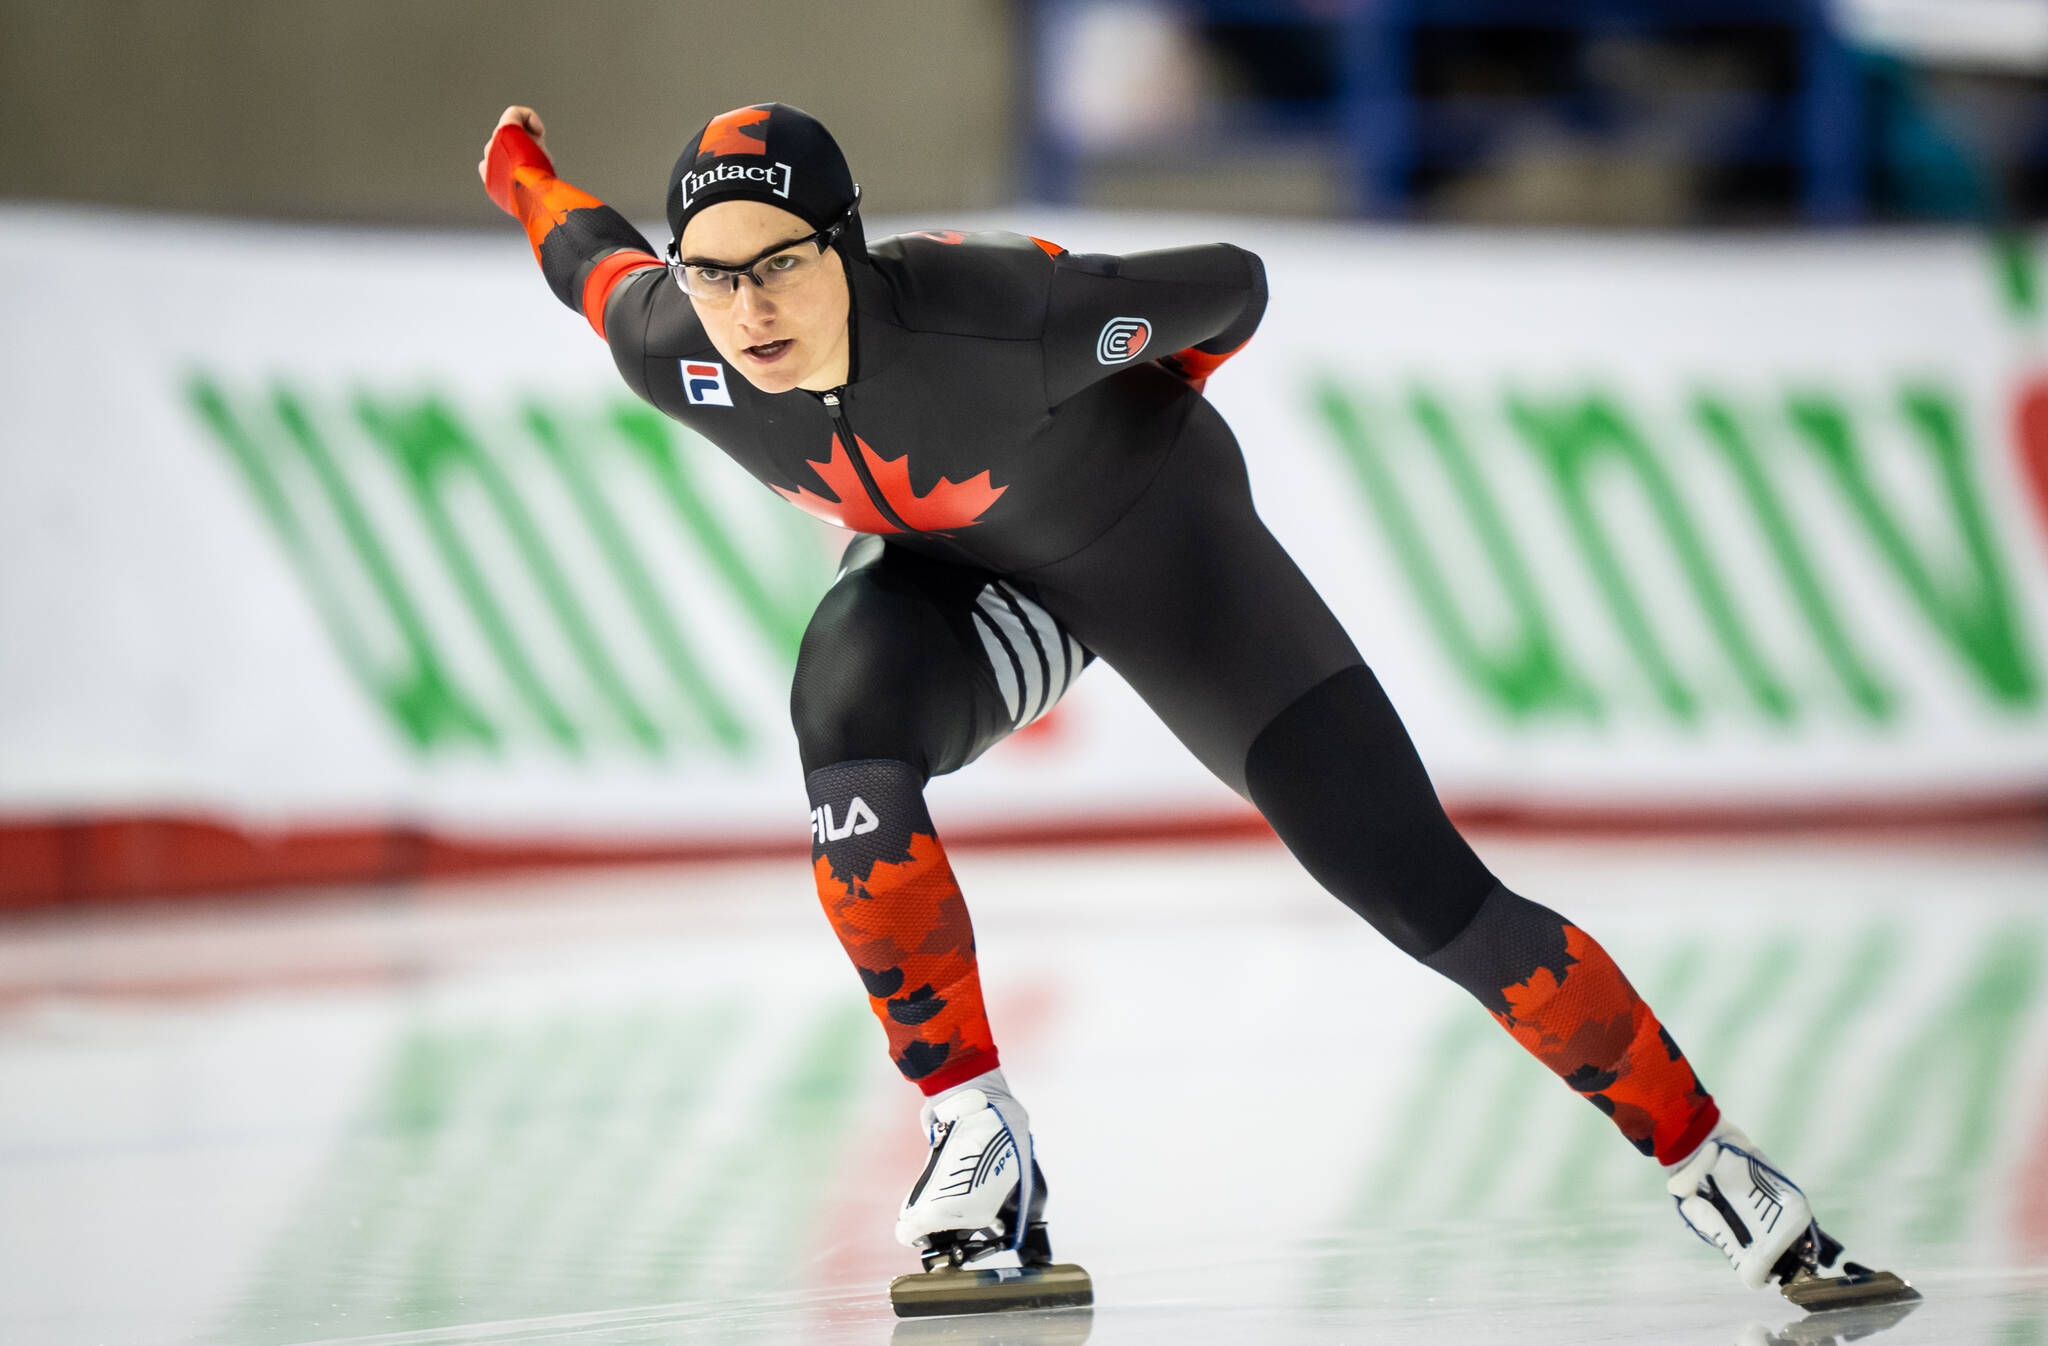 Alison Desmarais, of Vanderhoof, BC, skates in the women’s 1000m during the ISU World Speed Skating Single Distances Championships at the Olympic Oval in Calgary, Alberta on February 17, 2024. (Photo: Dave Holland/Speed Skating Canada)